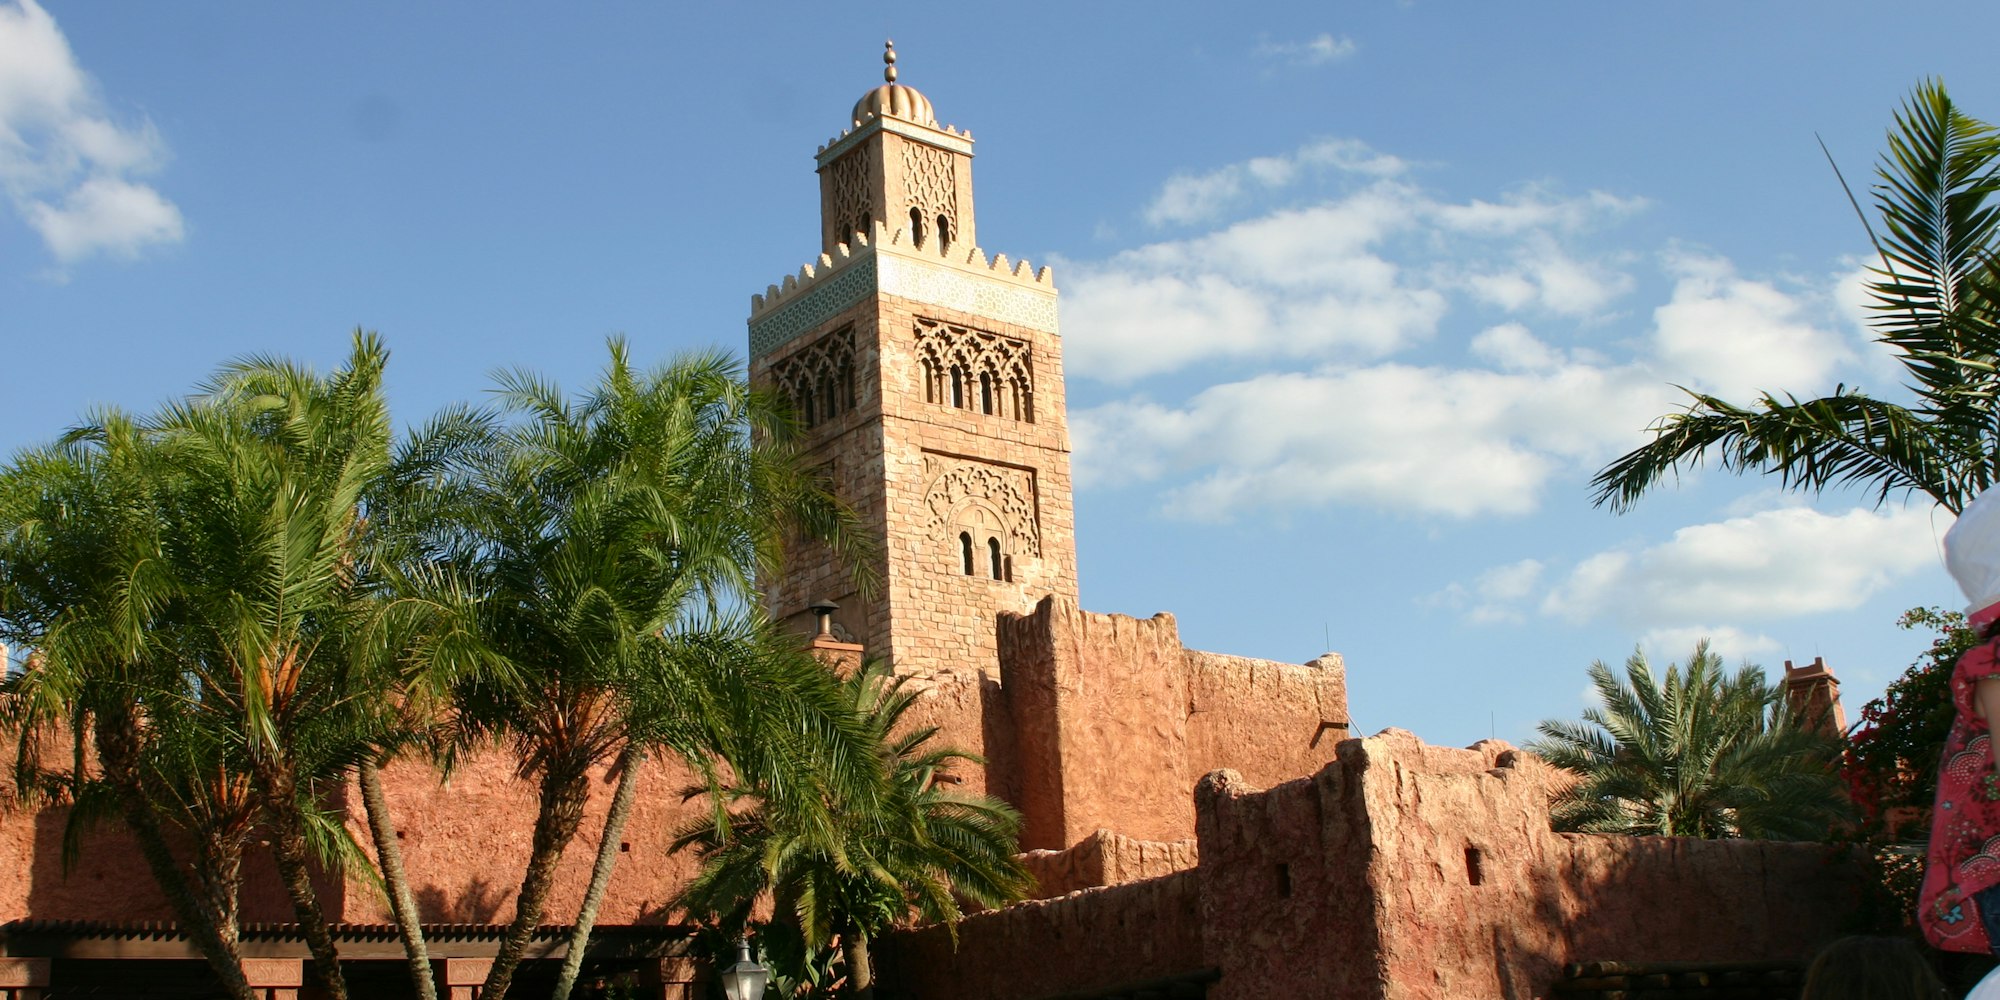 Cover Image for What’s New at EPCOT’s Morocco Pavilion?